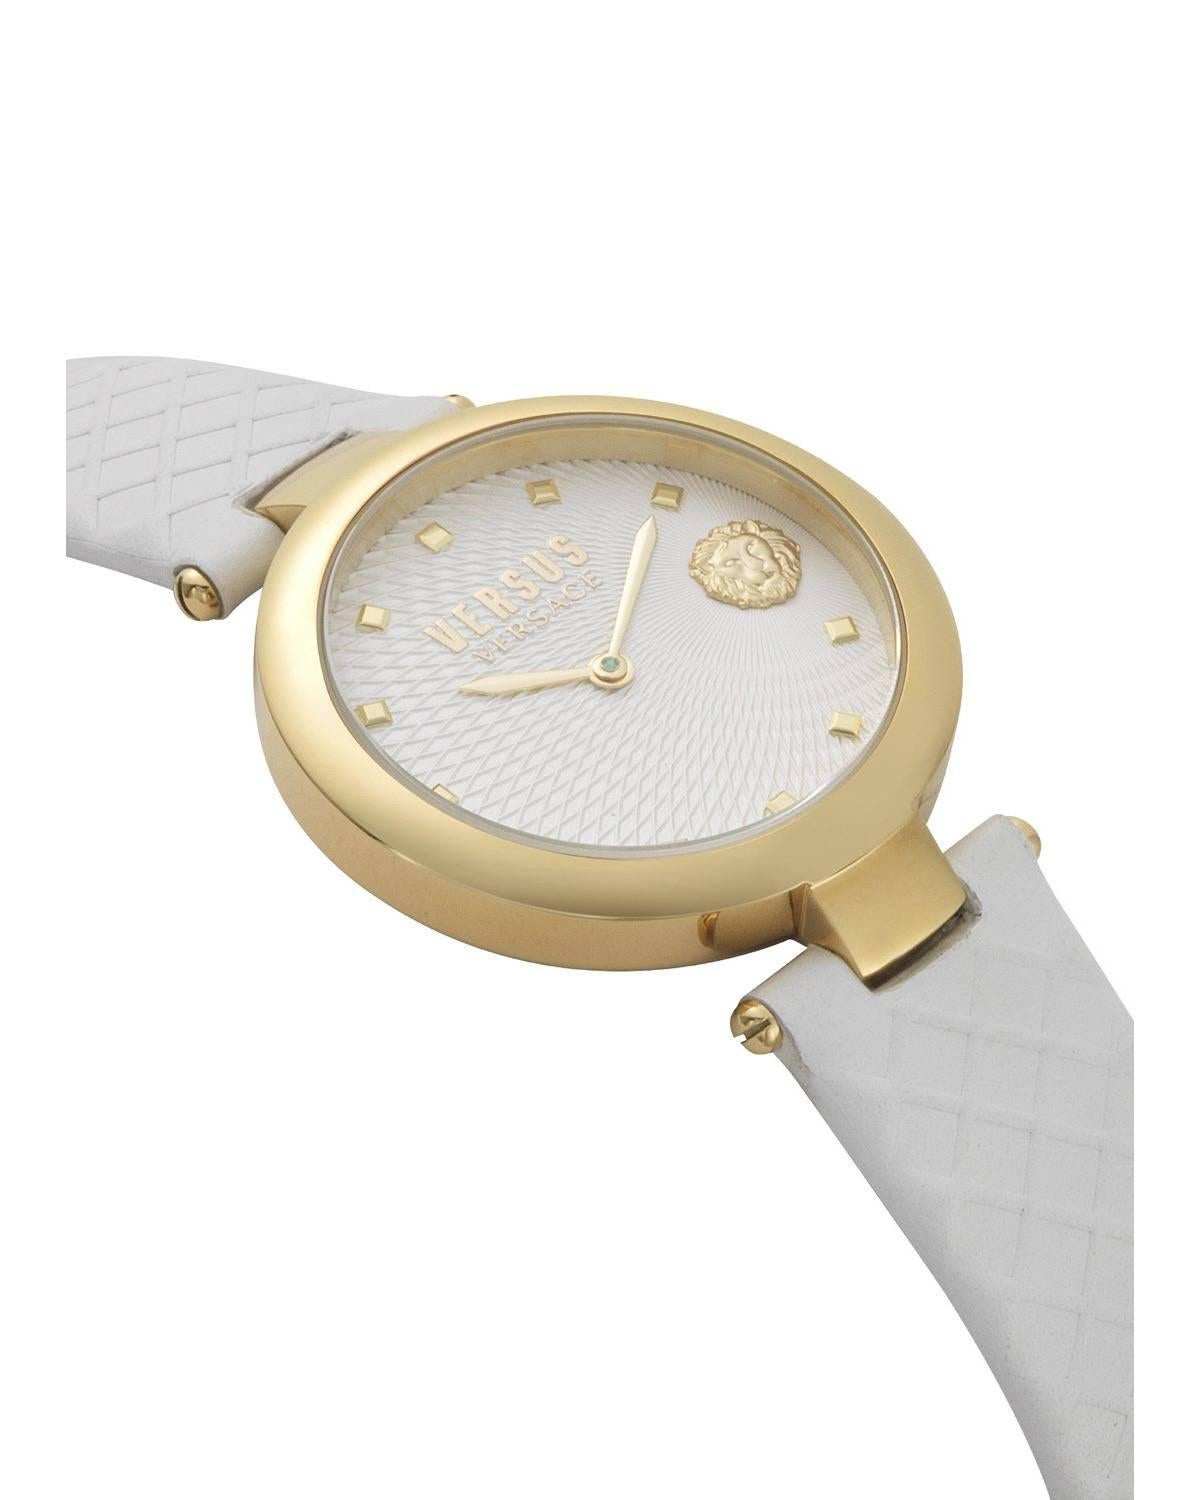 Versus Versace Buffle Bay Watch in white/gold. Versus Versace's buffle bay watch is powered by a Japanese Quartz movement set within a PVD gold plated stainless steel case. Sat on a white leather strap with buckle fastening, the women's watch